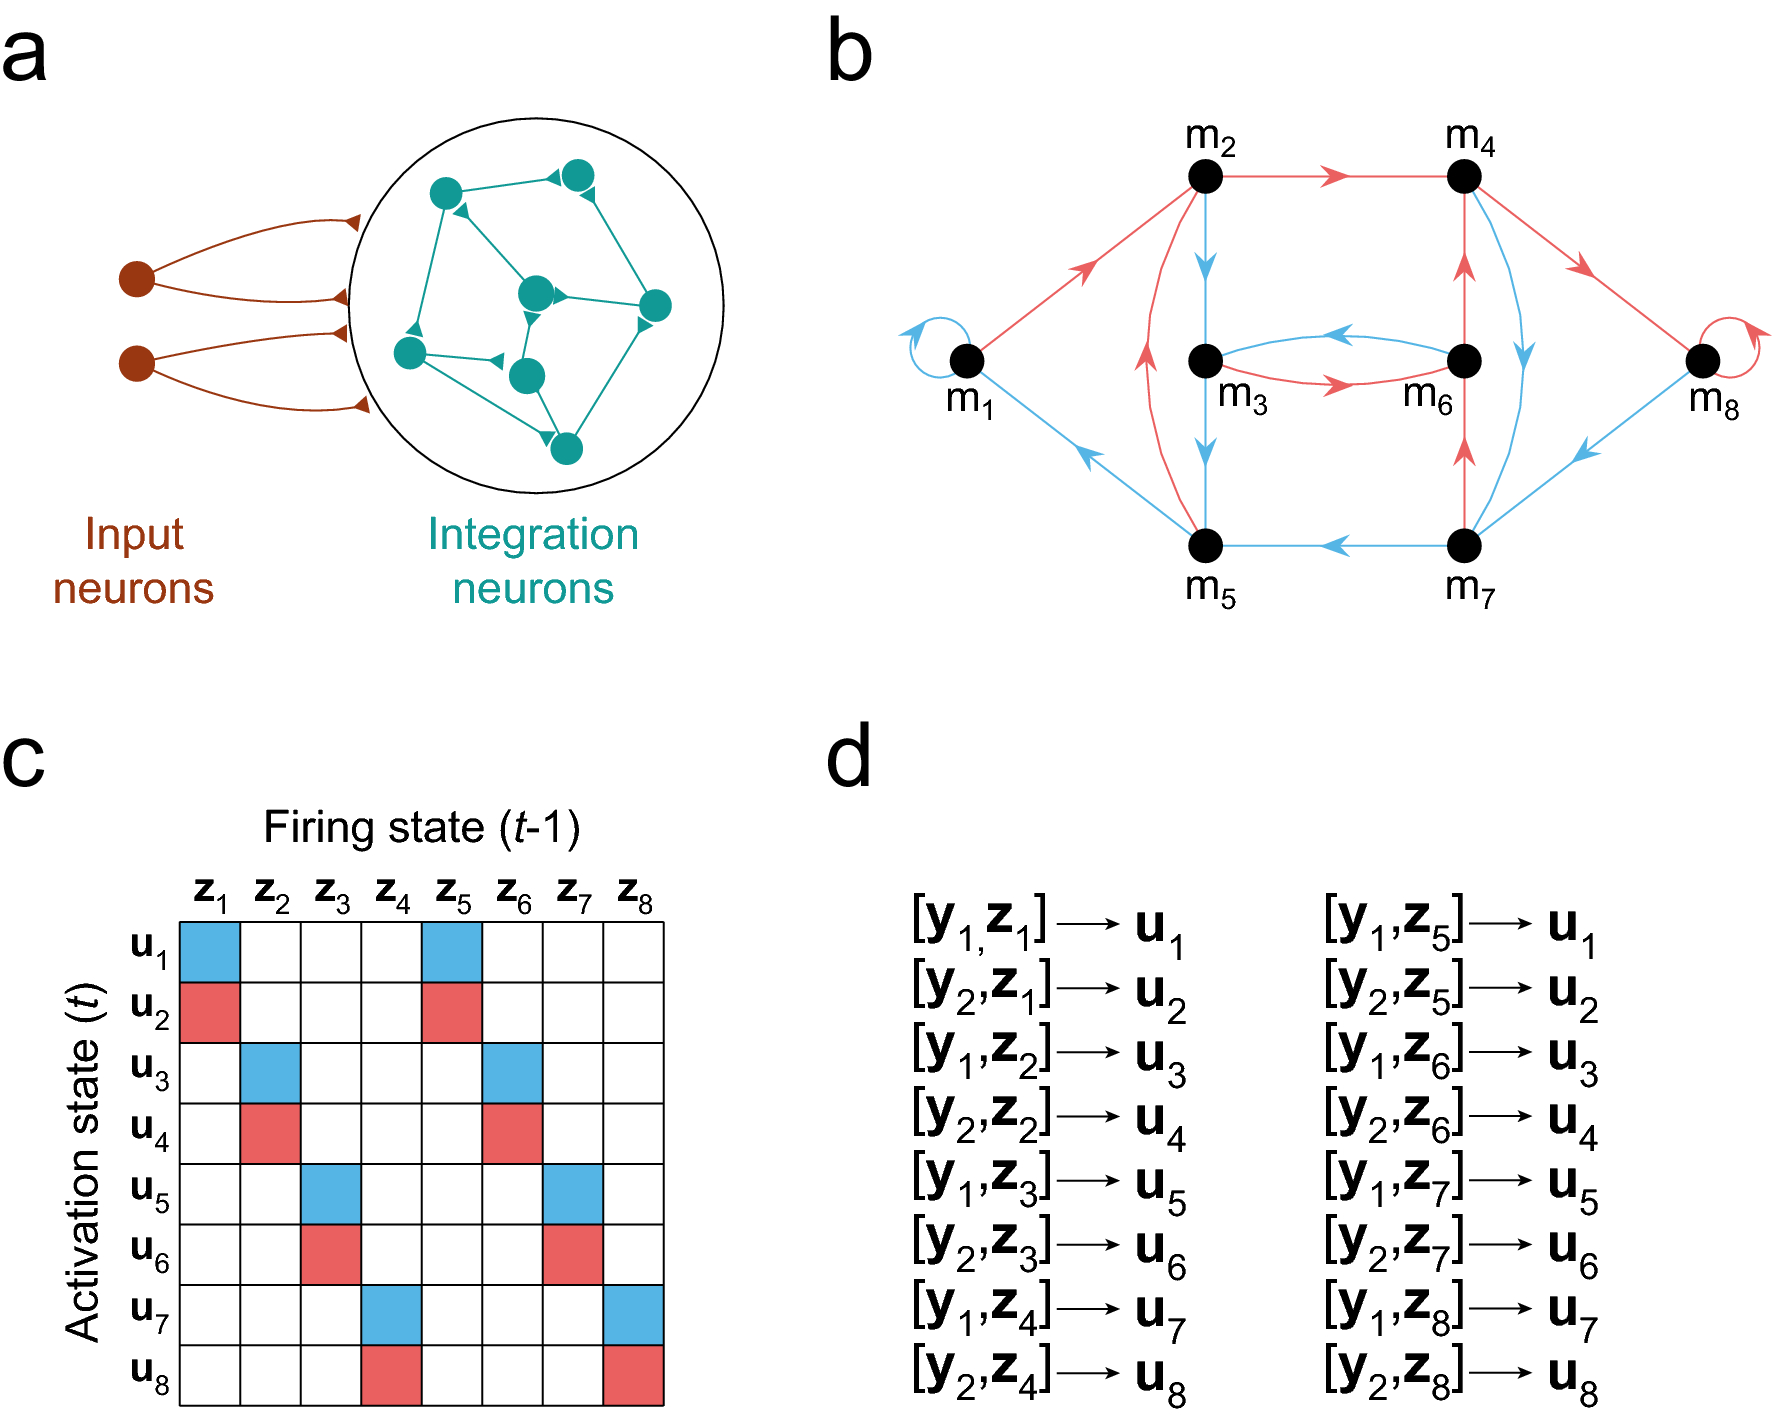 Probing the structure–function relationship with neural networks  constructed by solving a system of linear equations | Scientific Reports